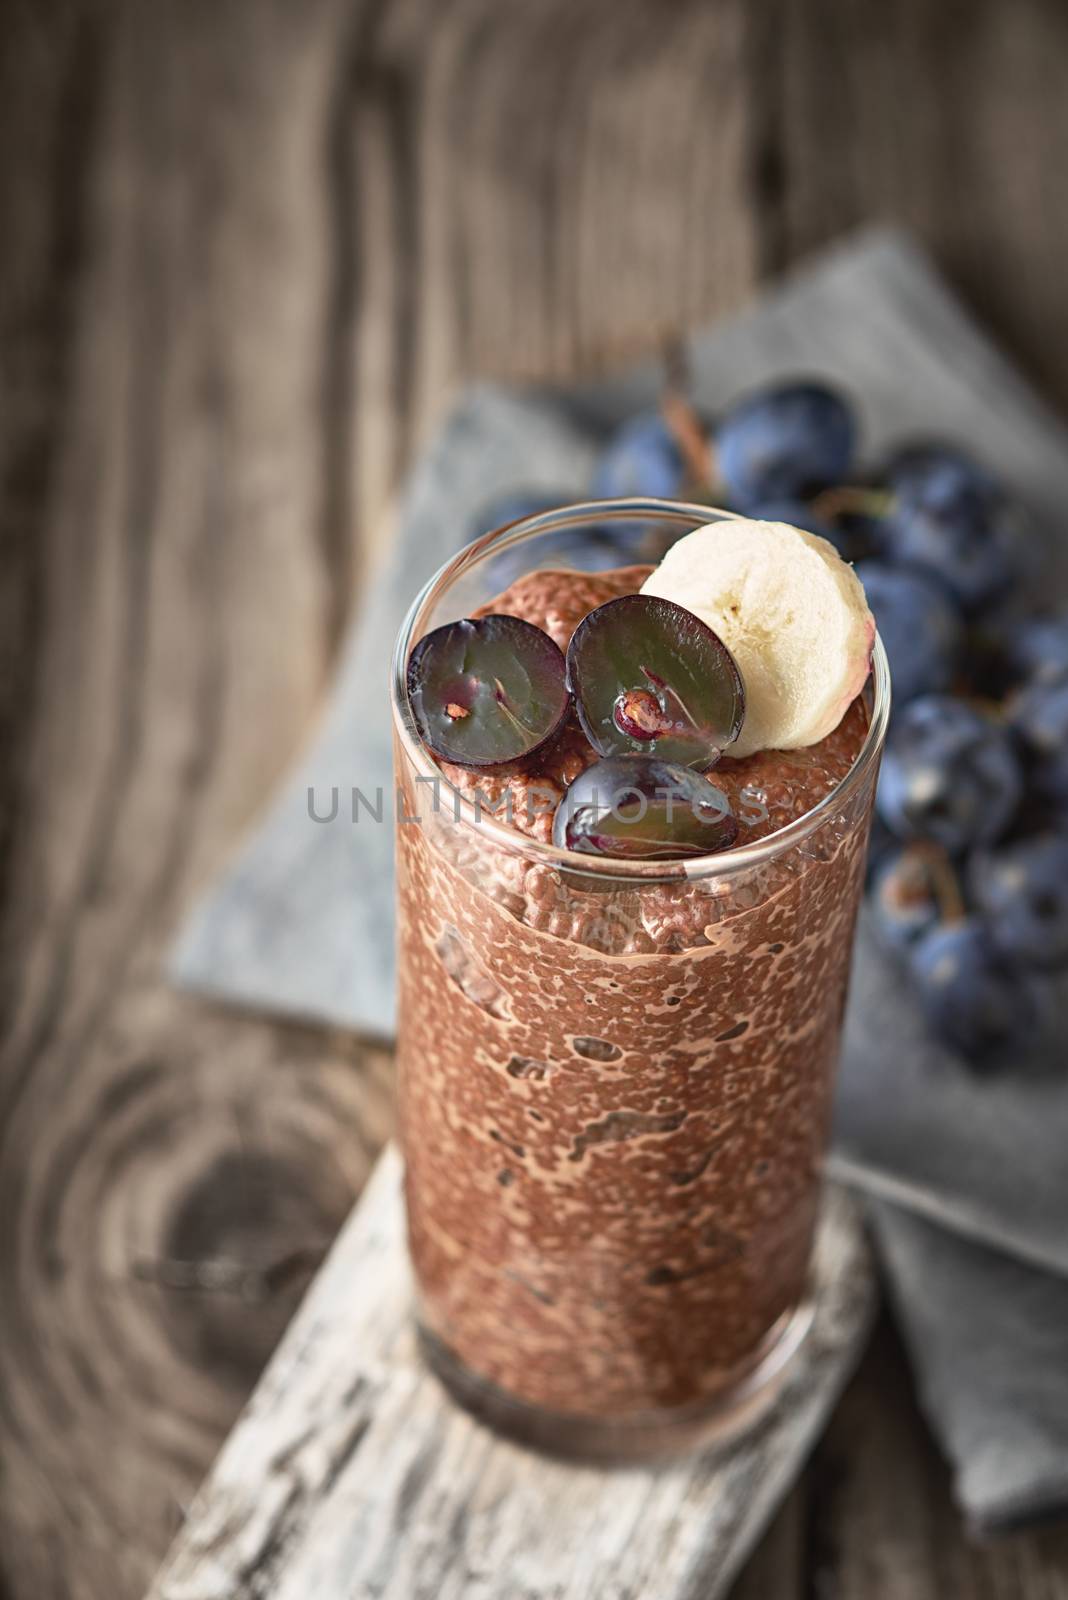 Chocolate chia pudding with fruit in the glass on the wooden table